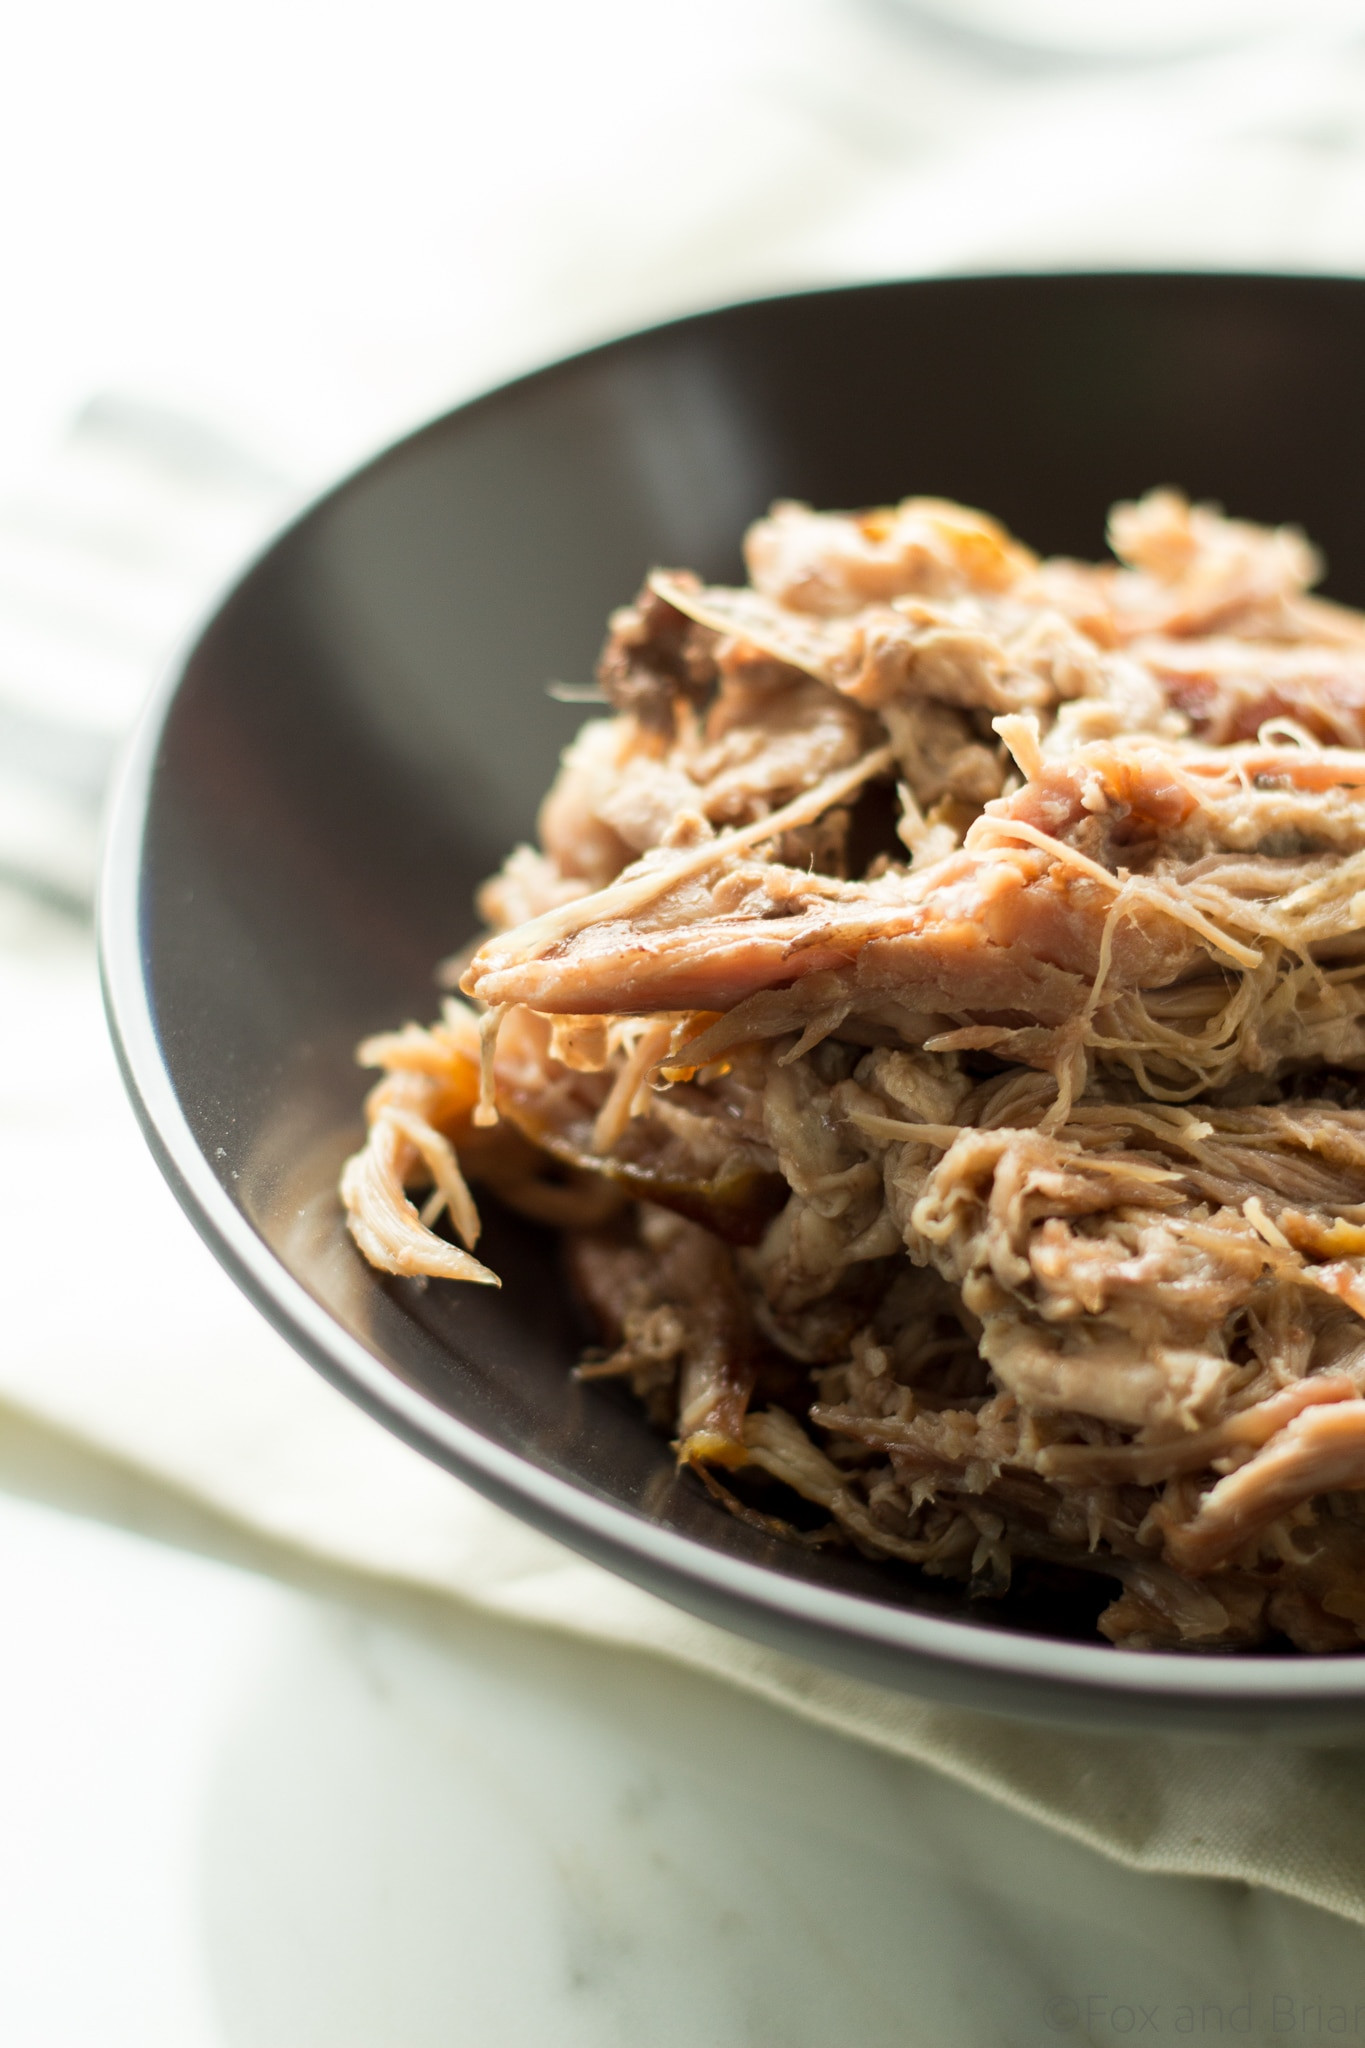 Pulled Pork Rubs Slow Cooker
 The Easiest Slow Cooker Pulled Pork Fox and Briar